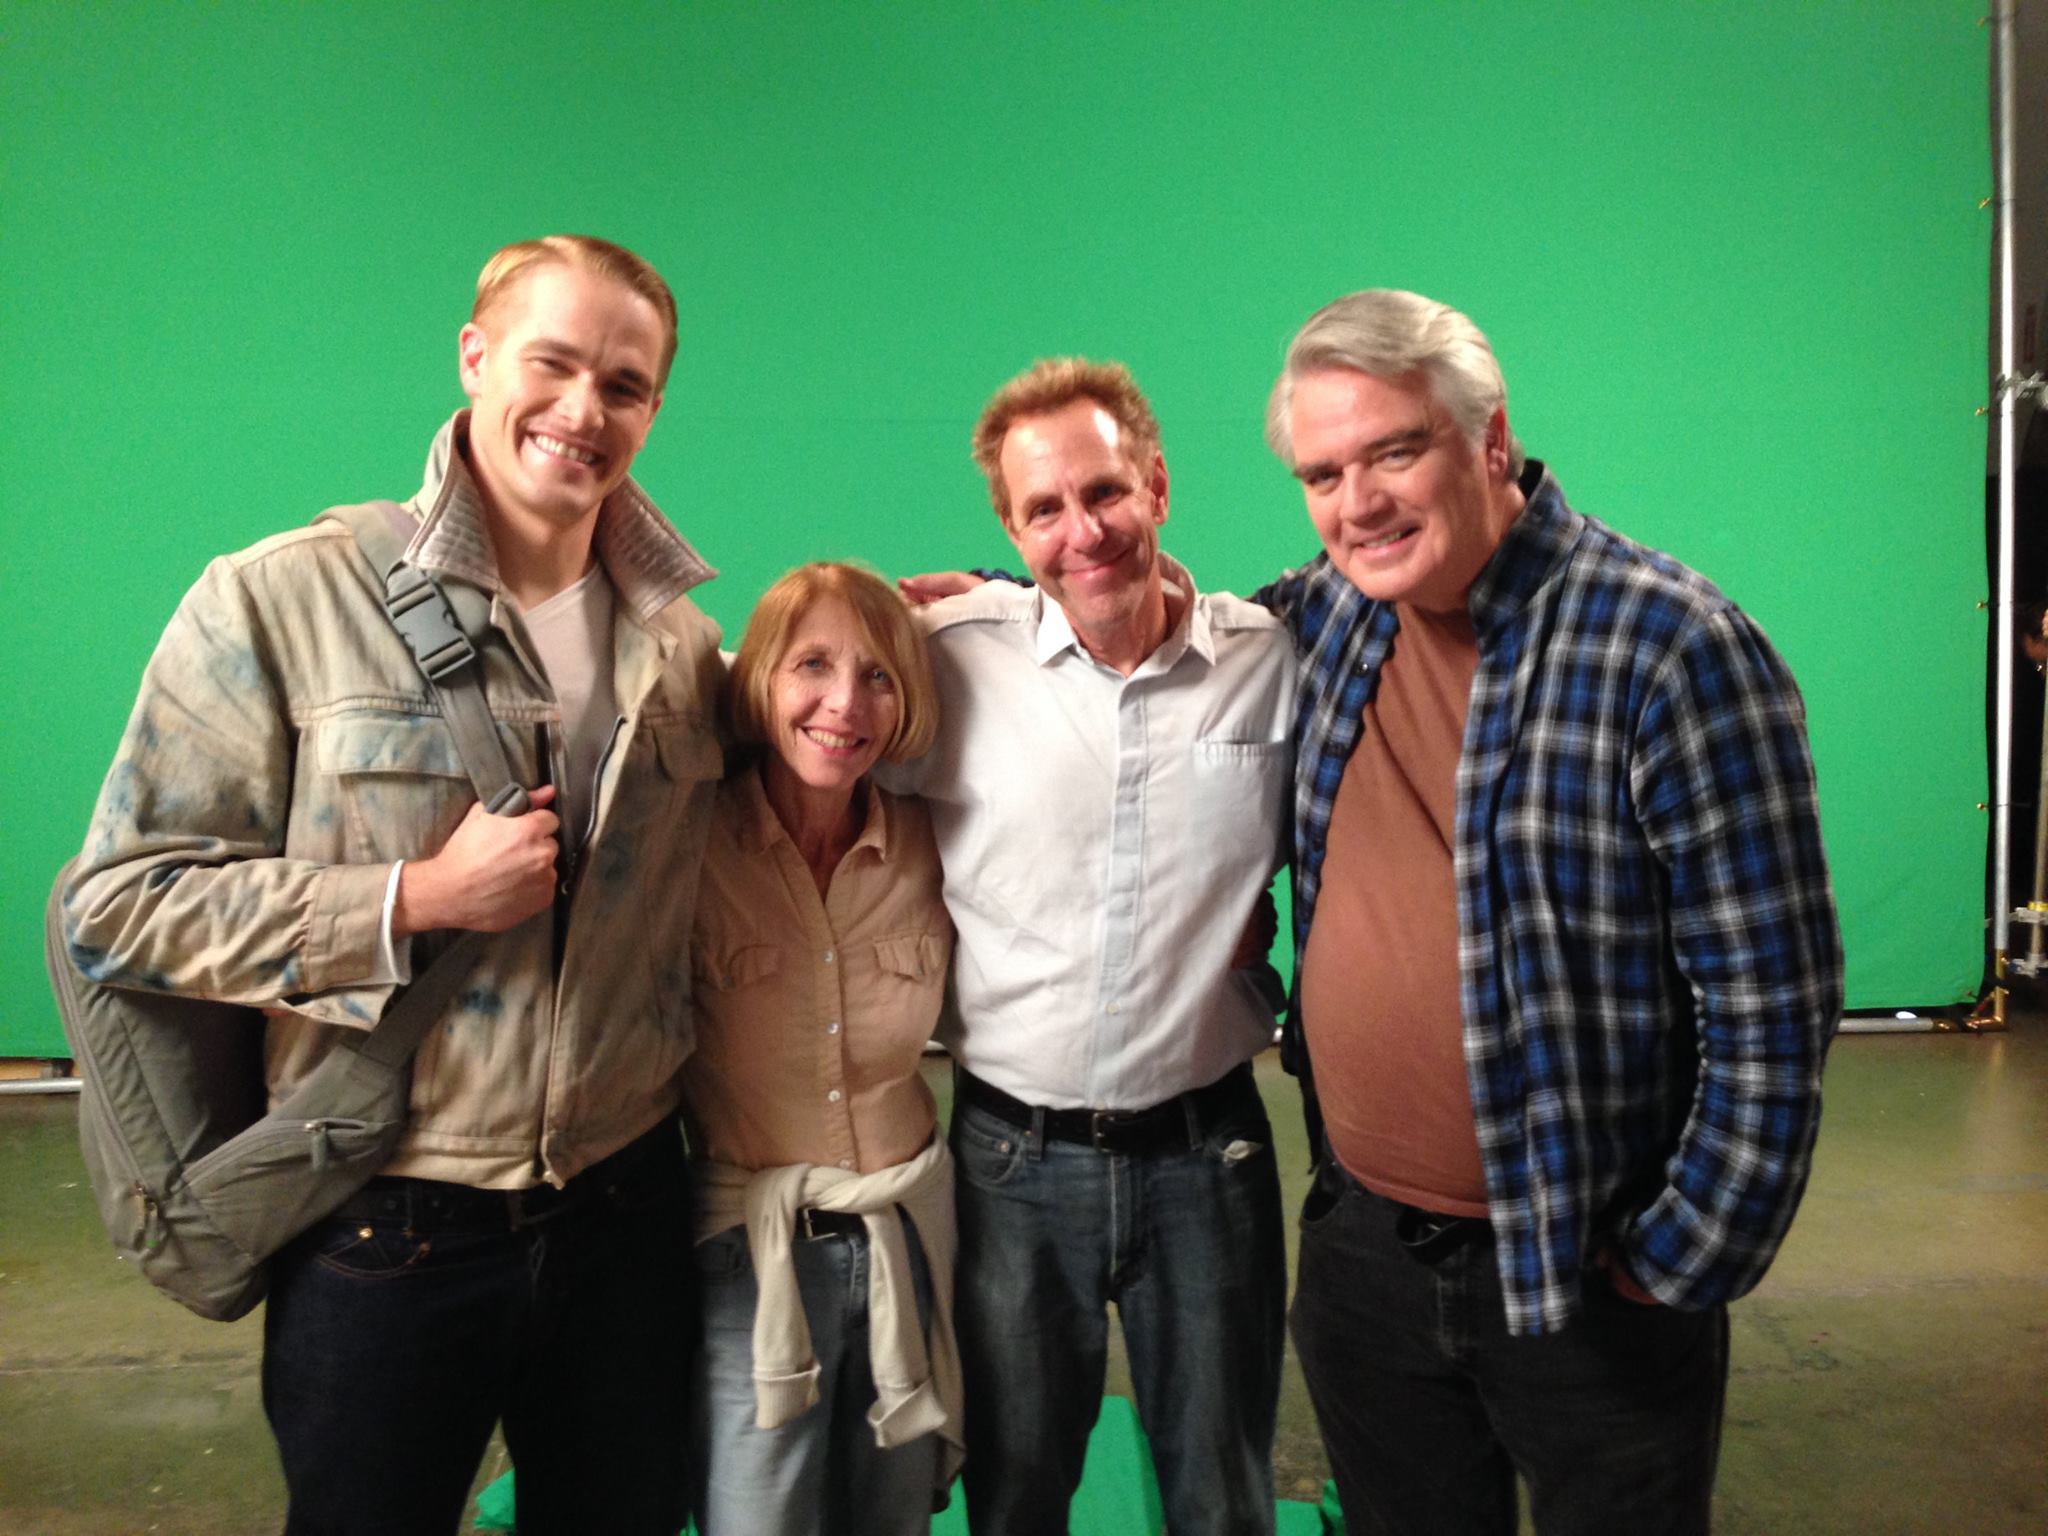 Space Command: On Set with Ethan McDowell, Elaine Zicree, Marc Zicree, and Michael Harney